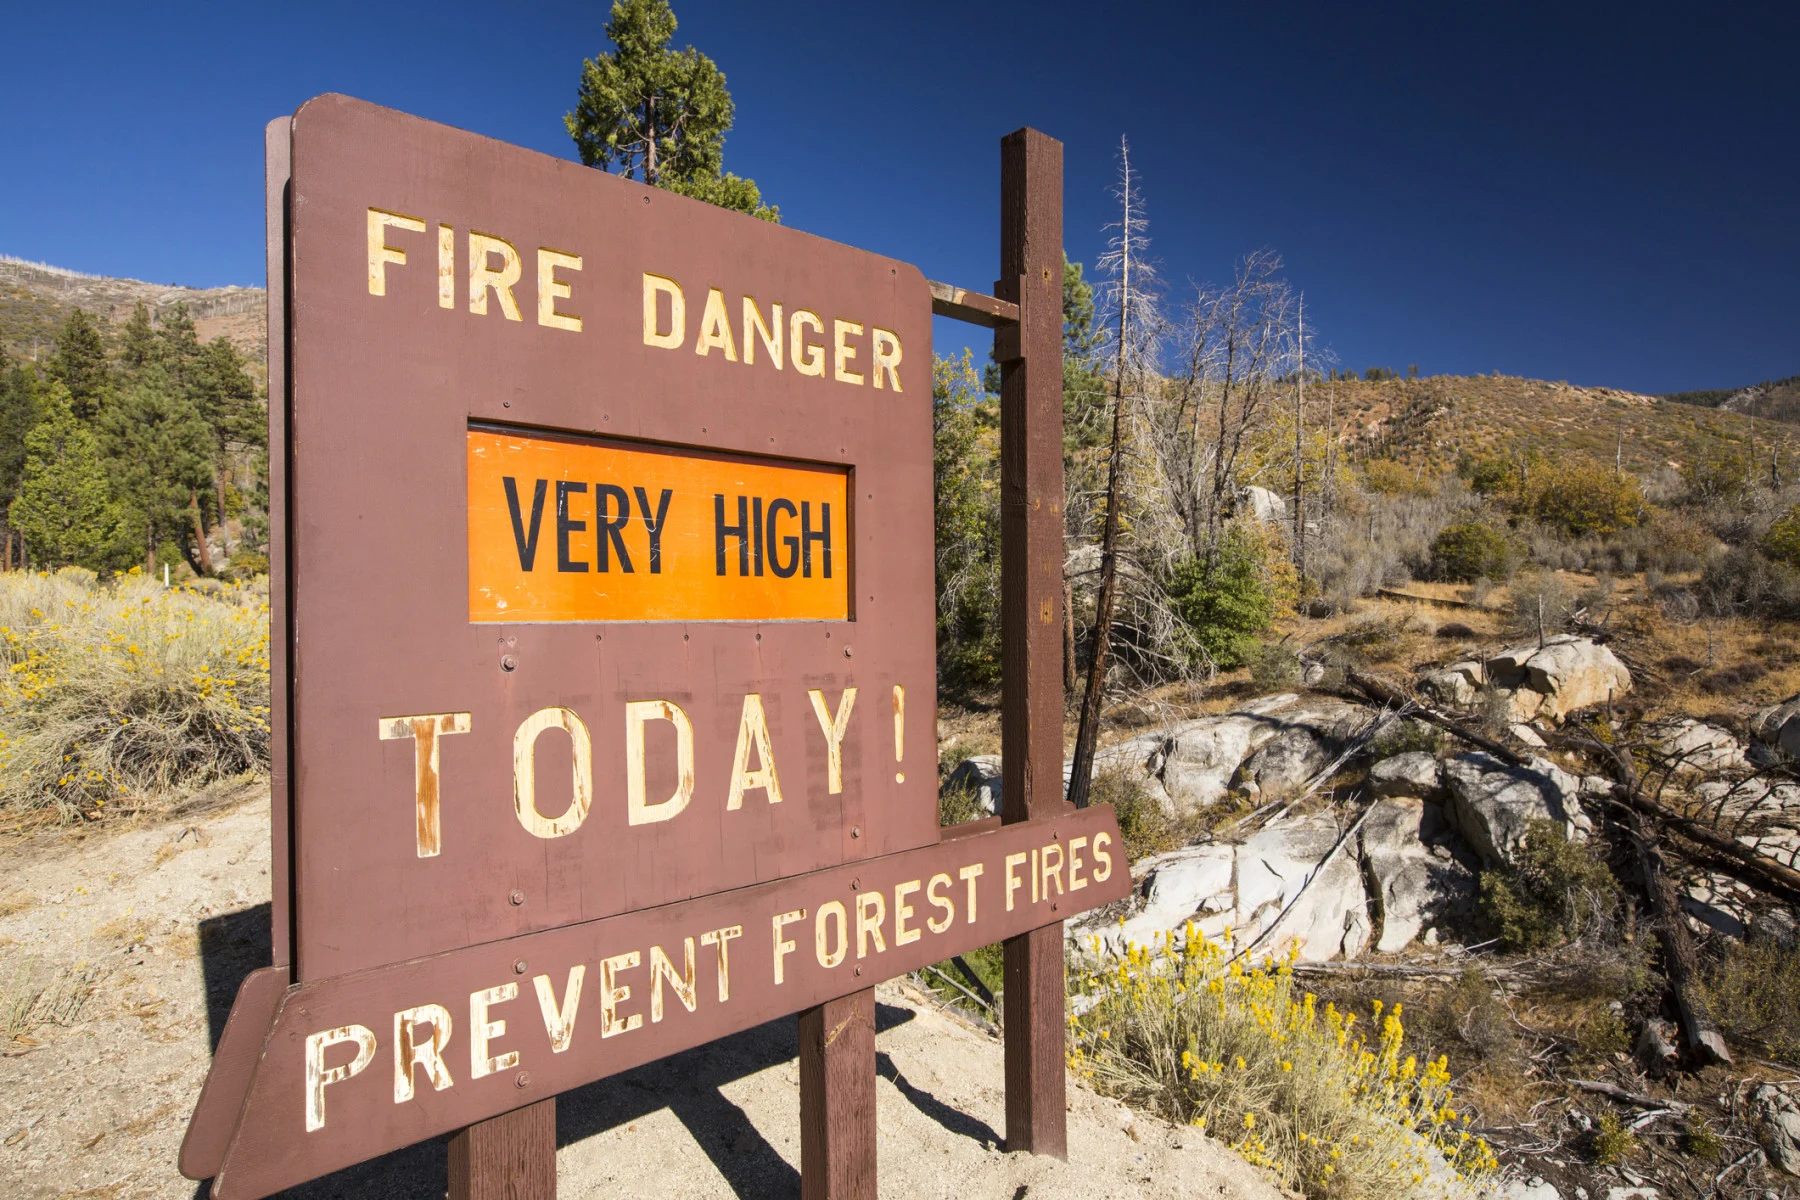 fire sign in california (Ashley Cooper/ The Image Bank/ Getty Images)